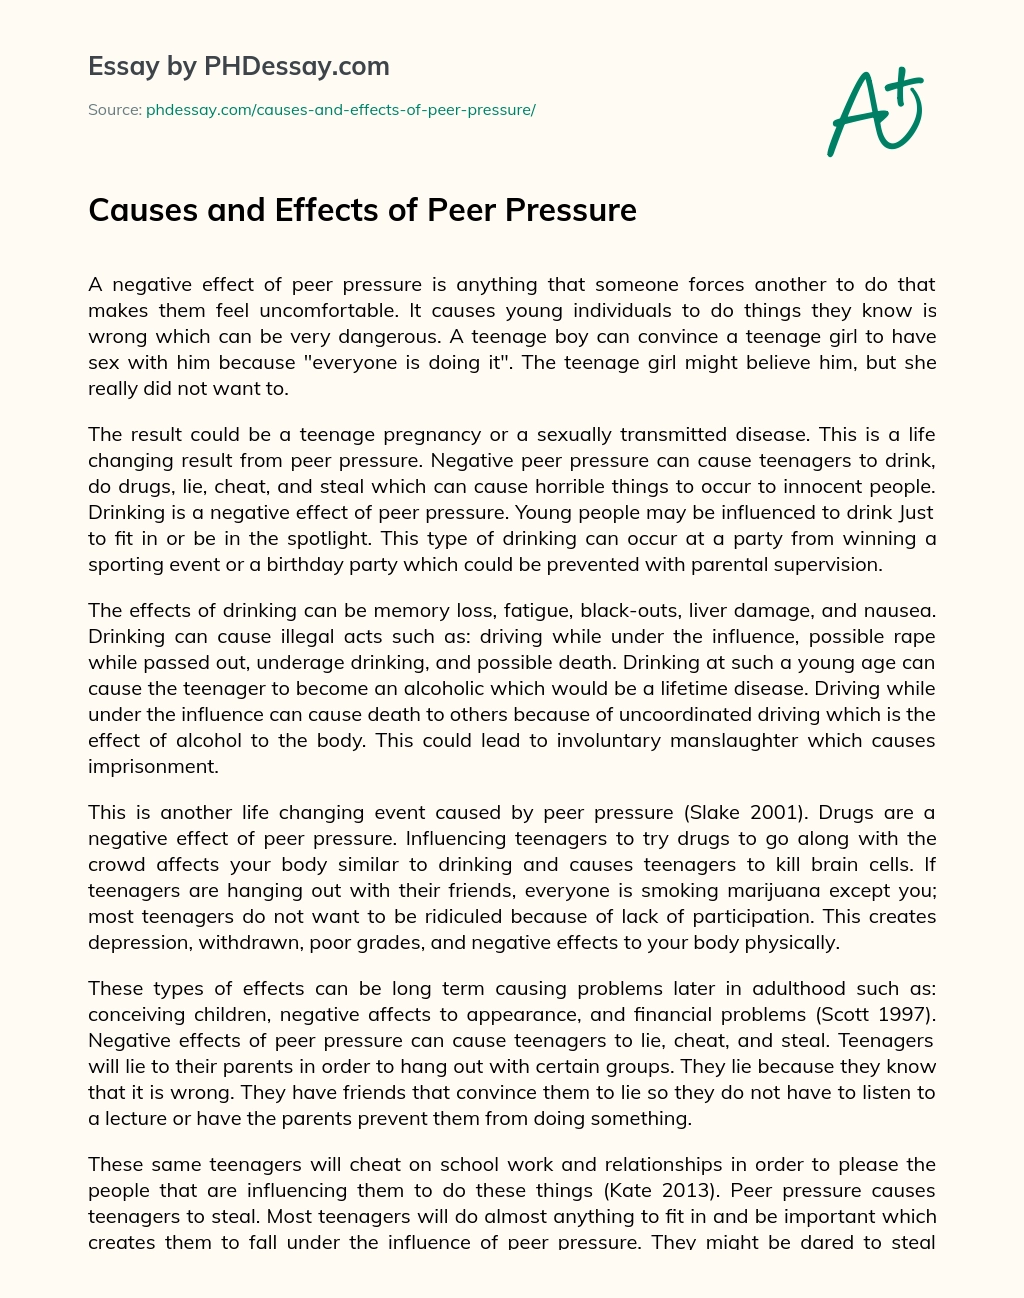 Causes and Effects of Peer Pressure essay